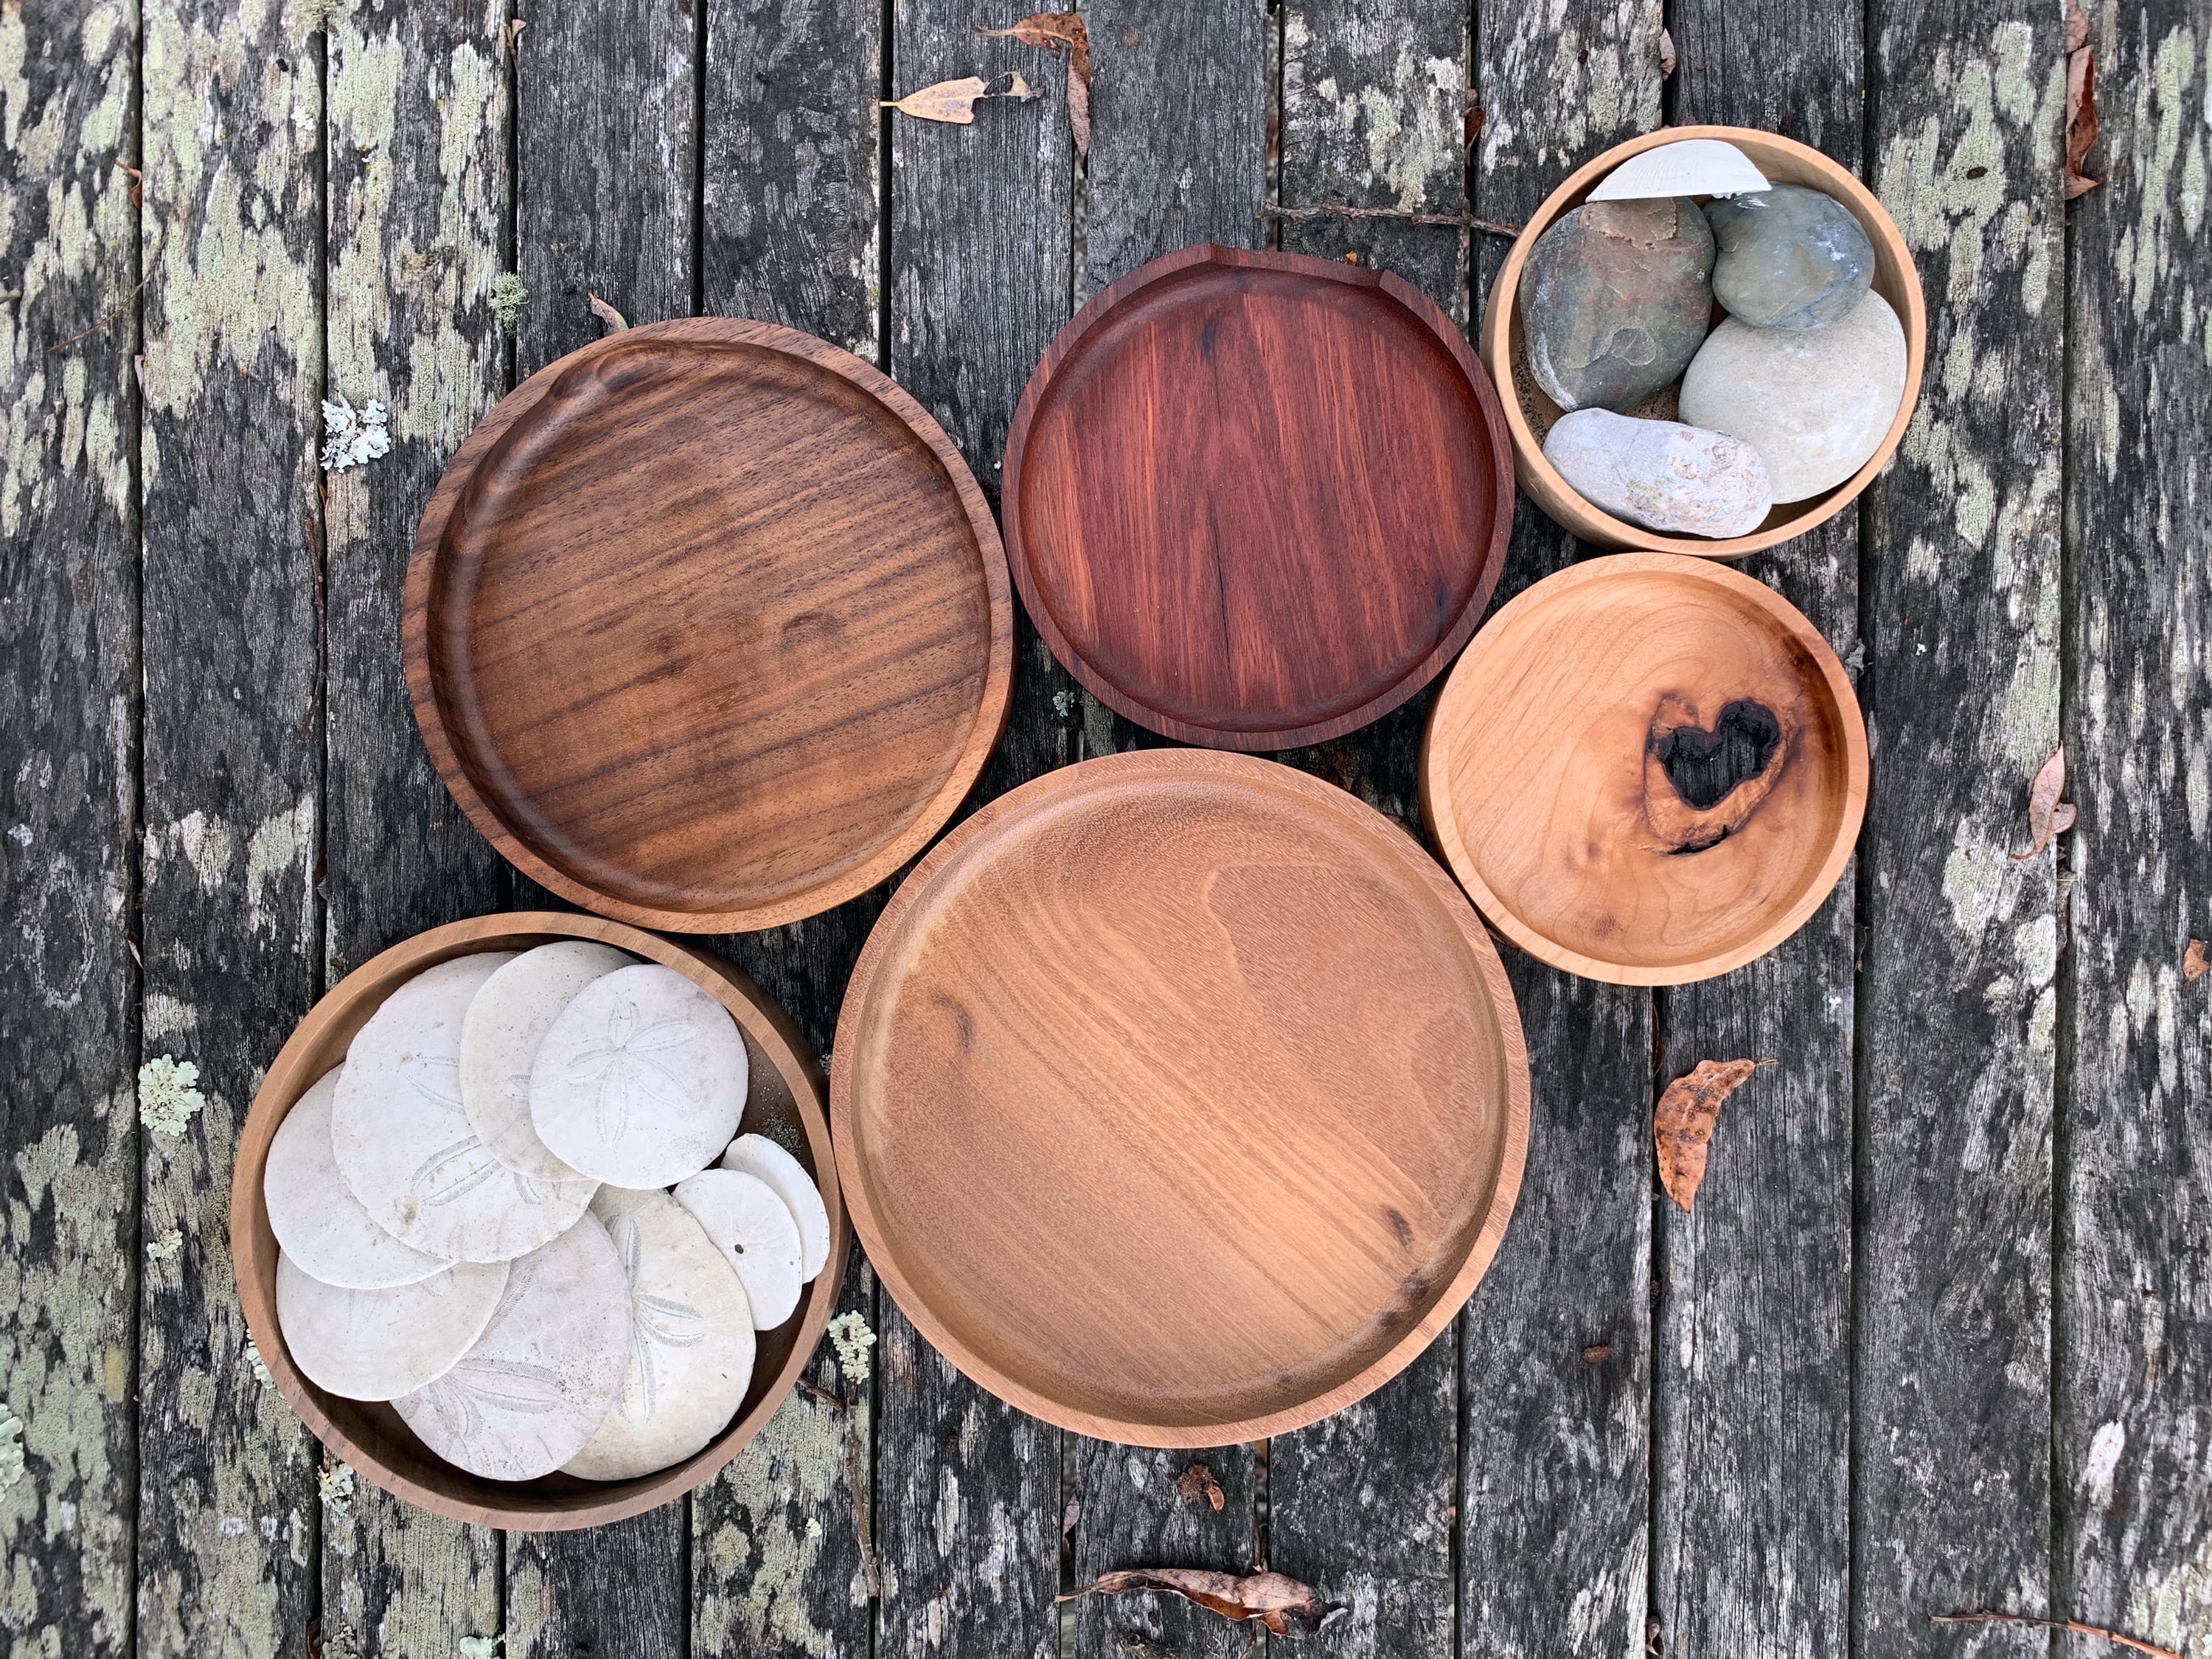 Wooden dishes